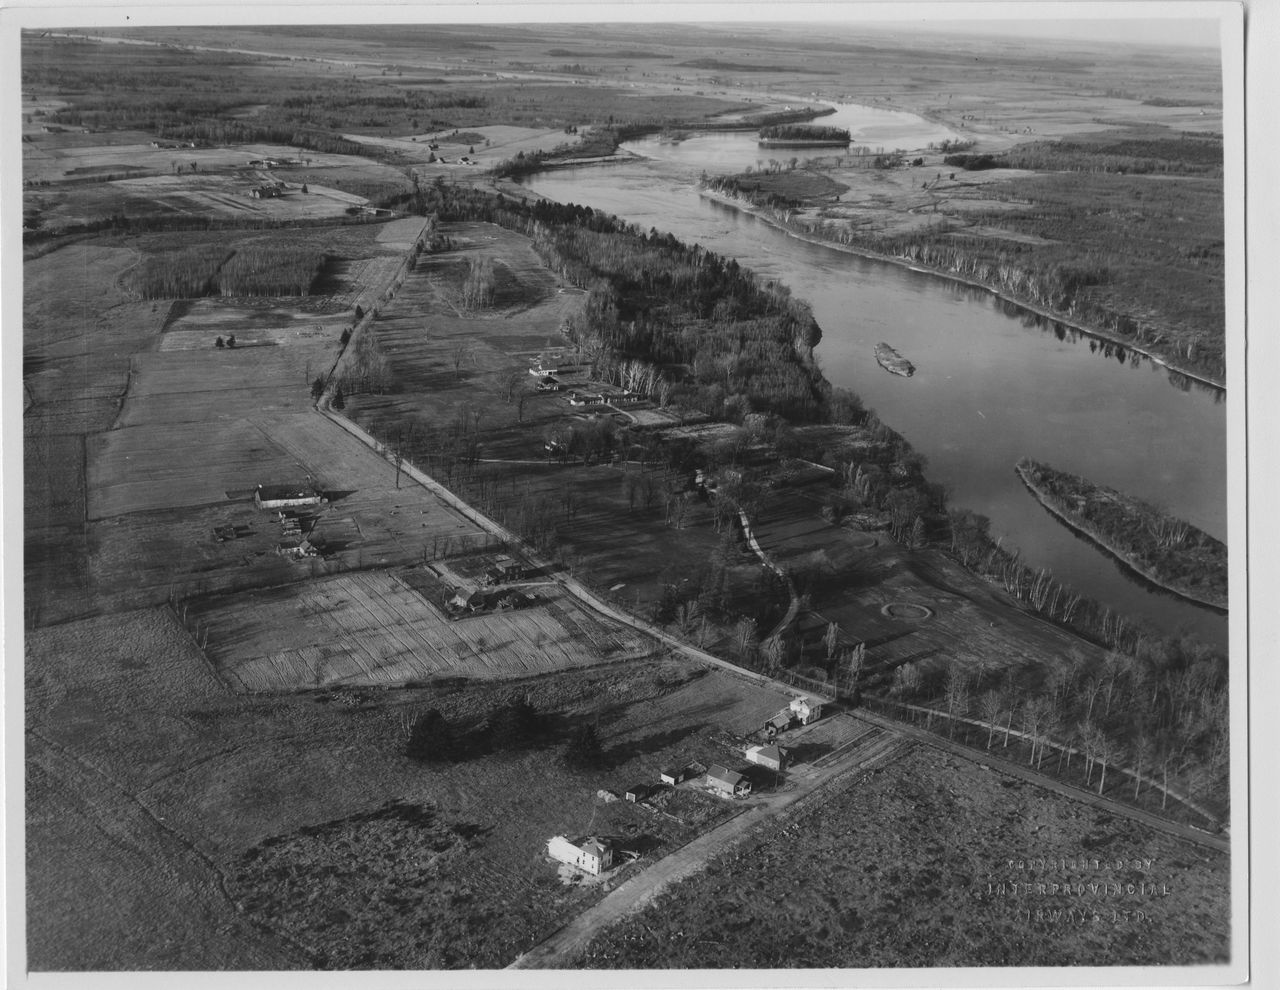 Black and white photograph showing an aerial view of the golf course along the Saint Francis River. It also shows several houses scattered in the fields surrounding the golf course.